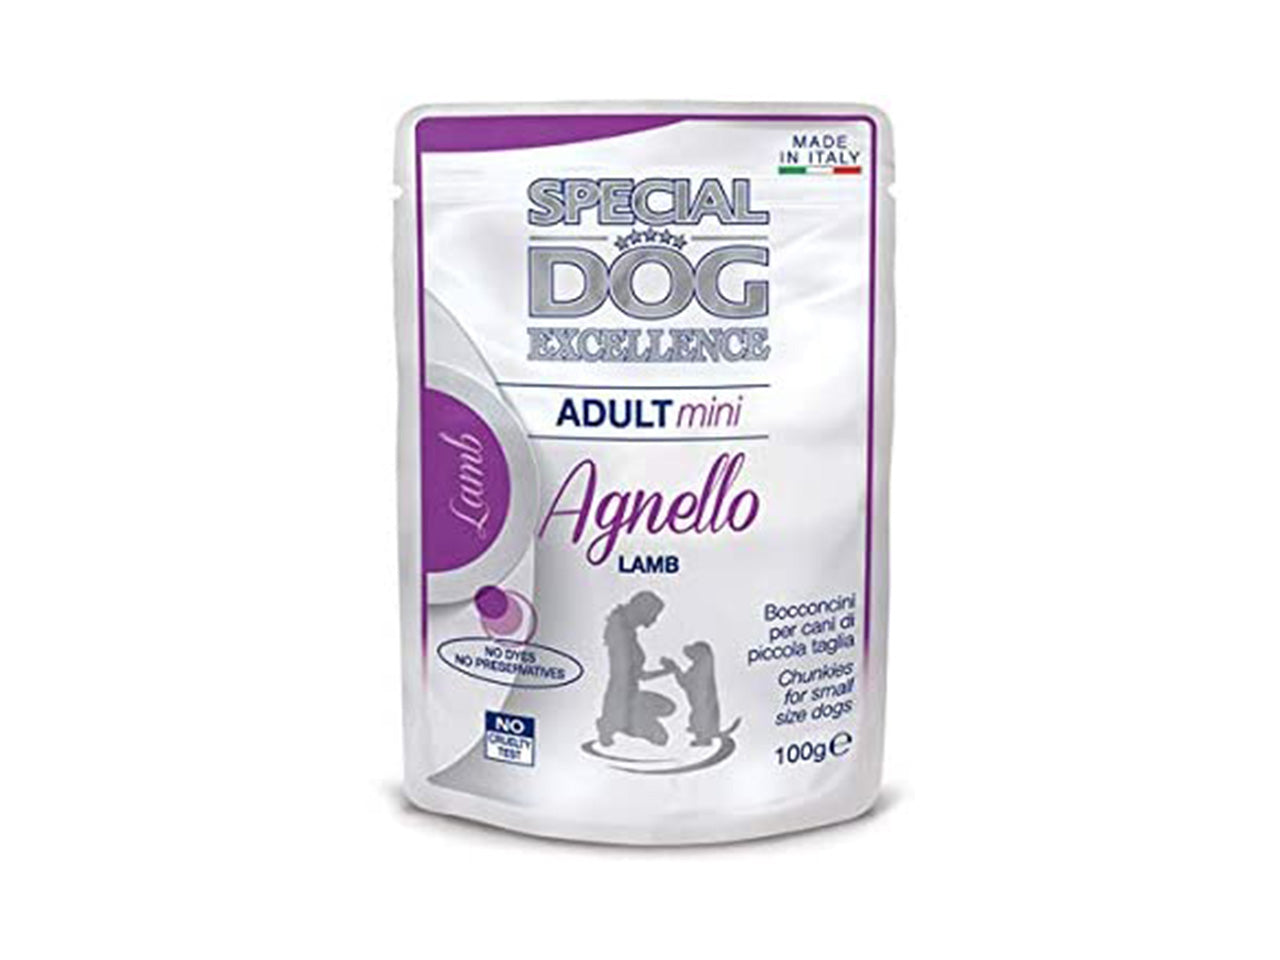 Special dog excellence 100gr agnello